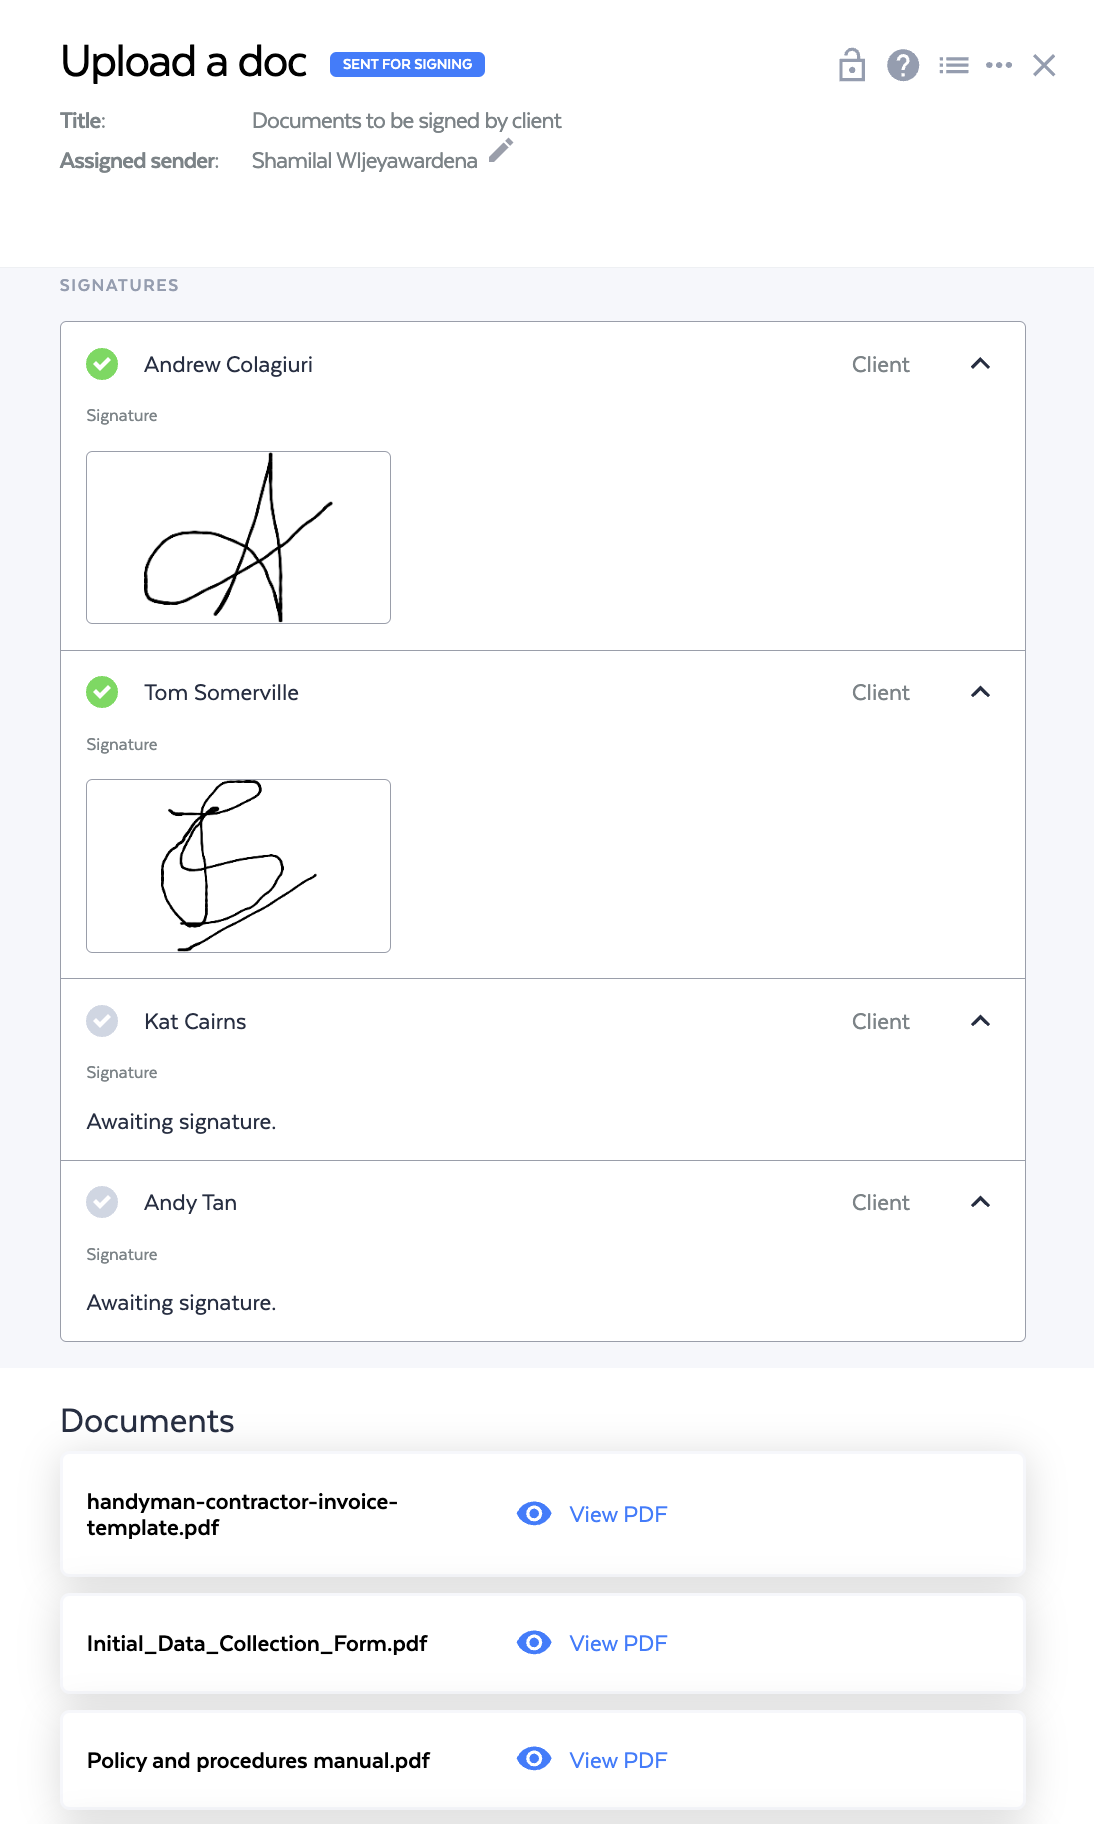 Once a document is sent for signing, you are able to view who has signed and who is waiting completion 